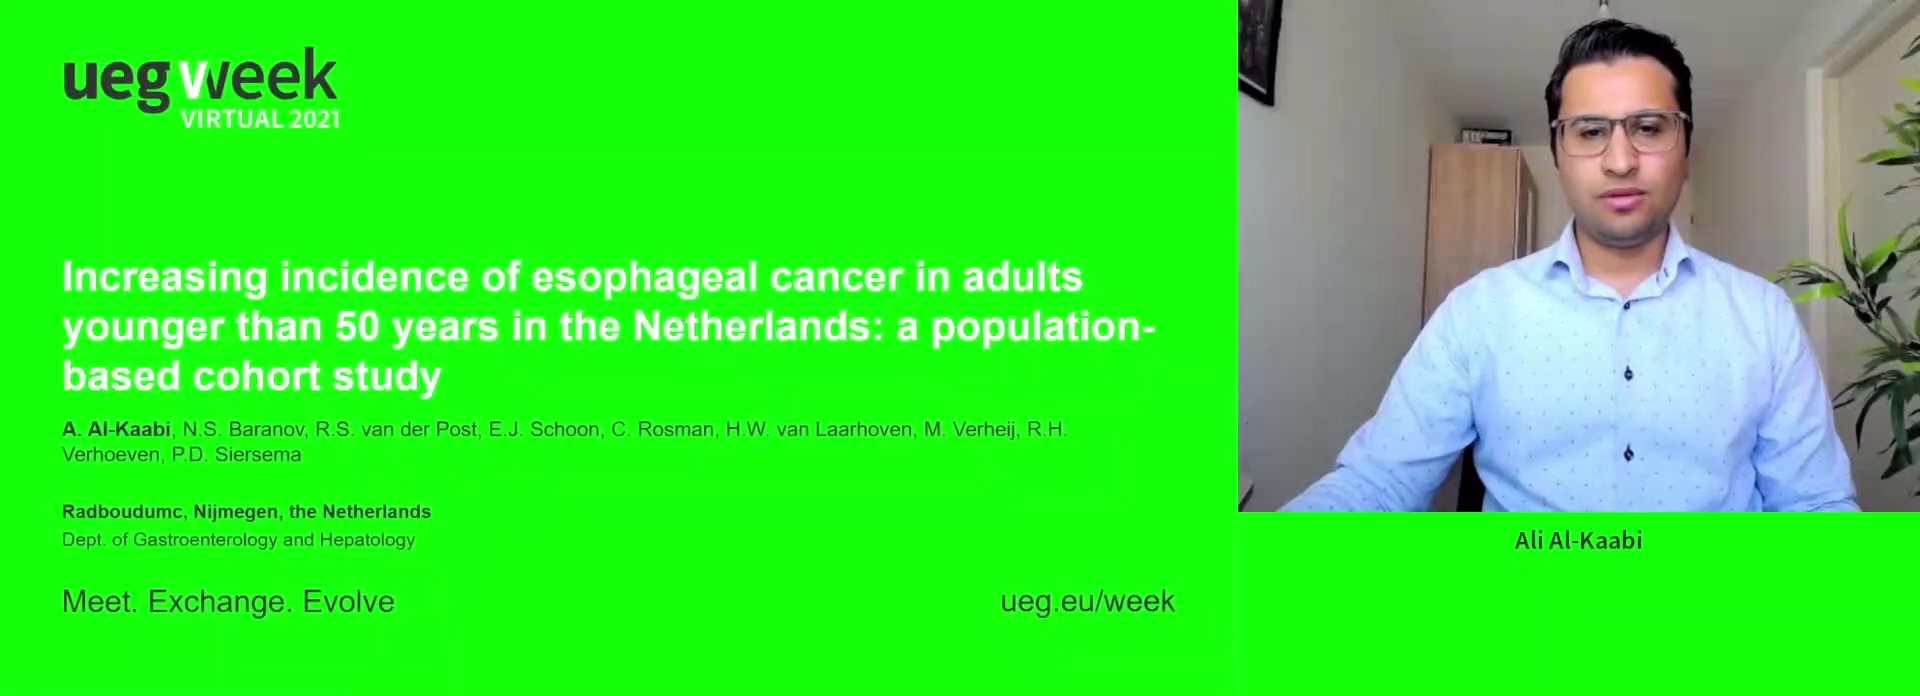 INCREASING INCIDENCE OF OESOPHAGEAL CANCER IN ADULTS YOUNGER THAN 50 YEARS IN THE NETHERLANDS: A POPULATION-BASED COHORT STUDY